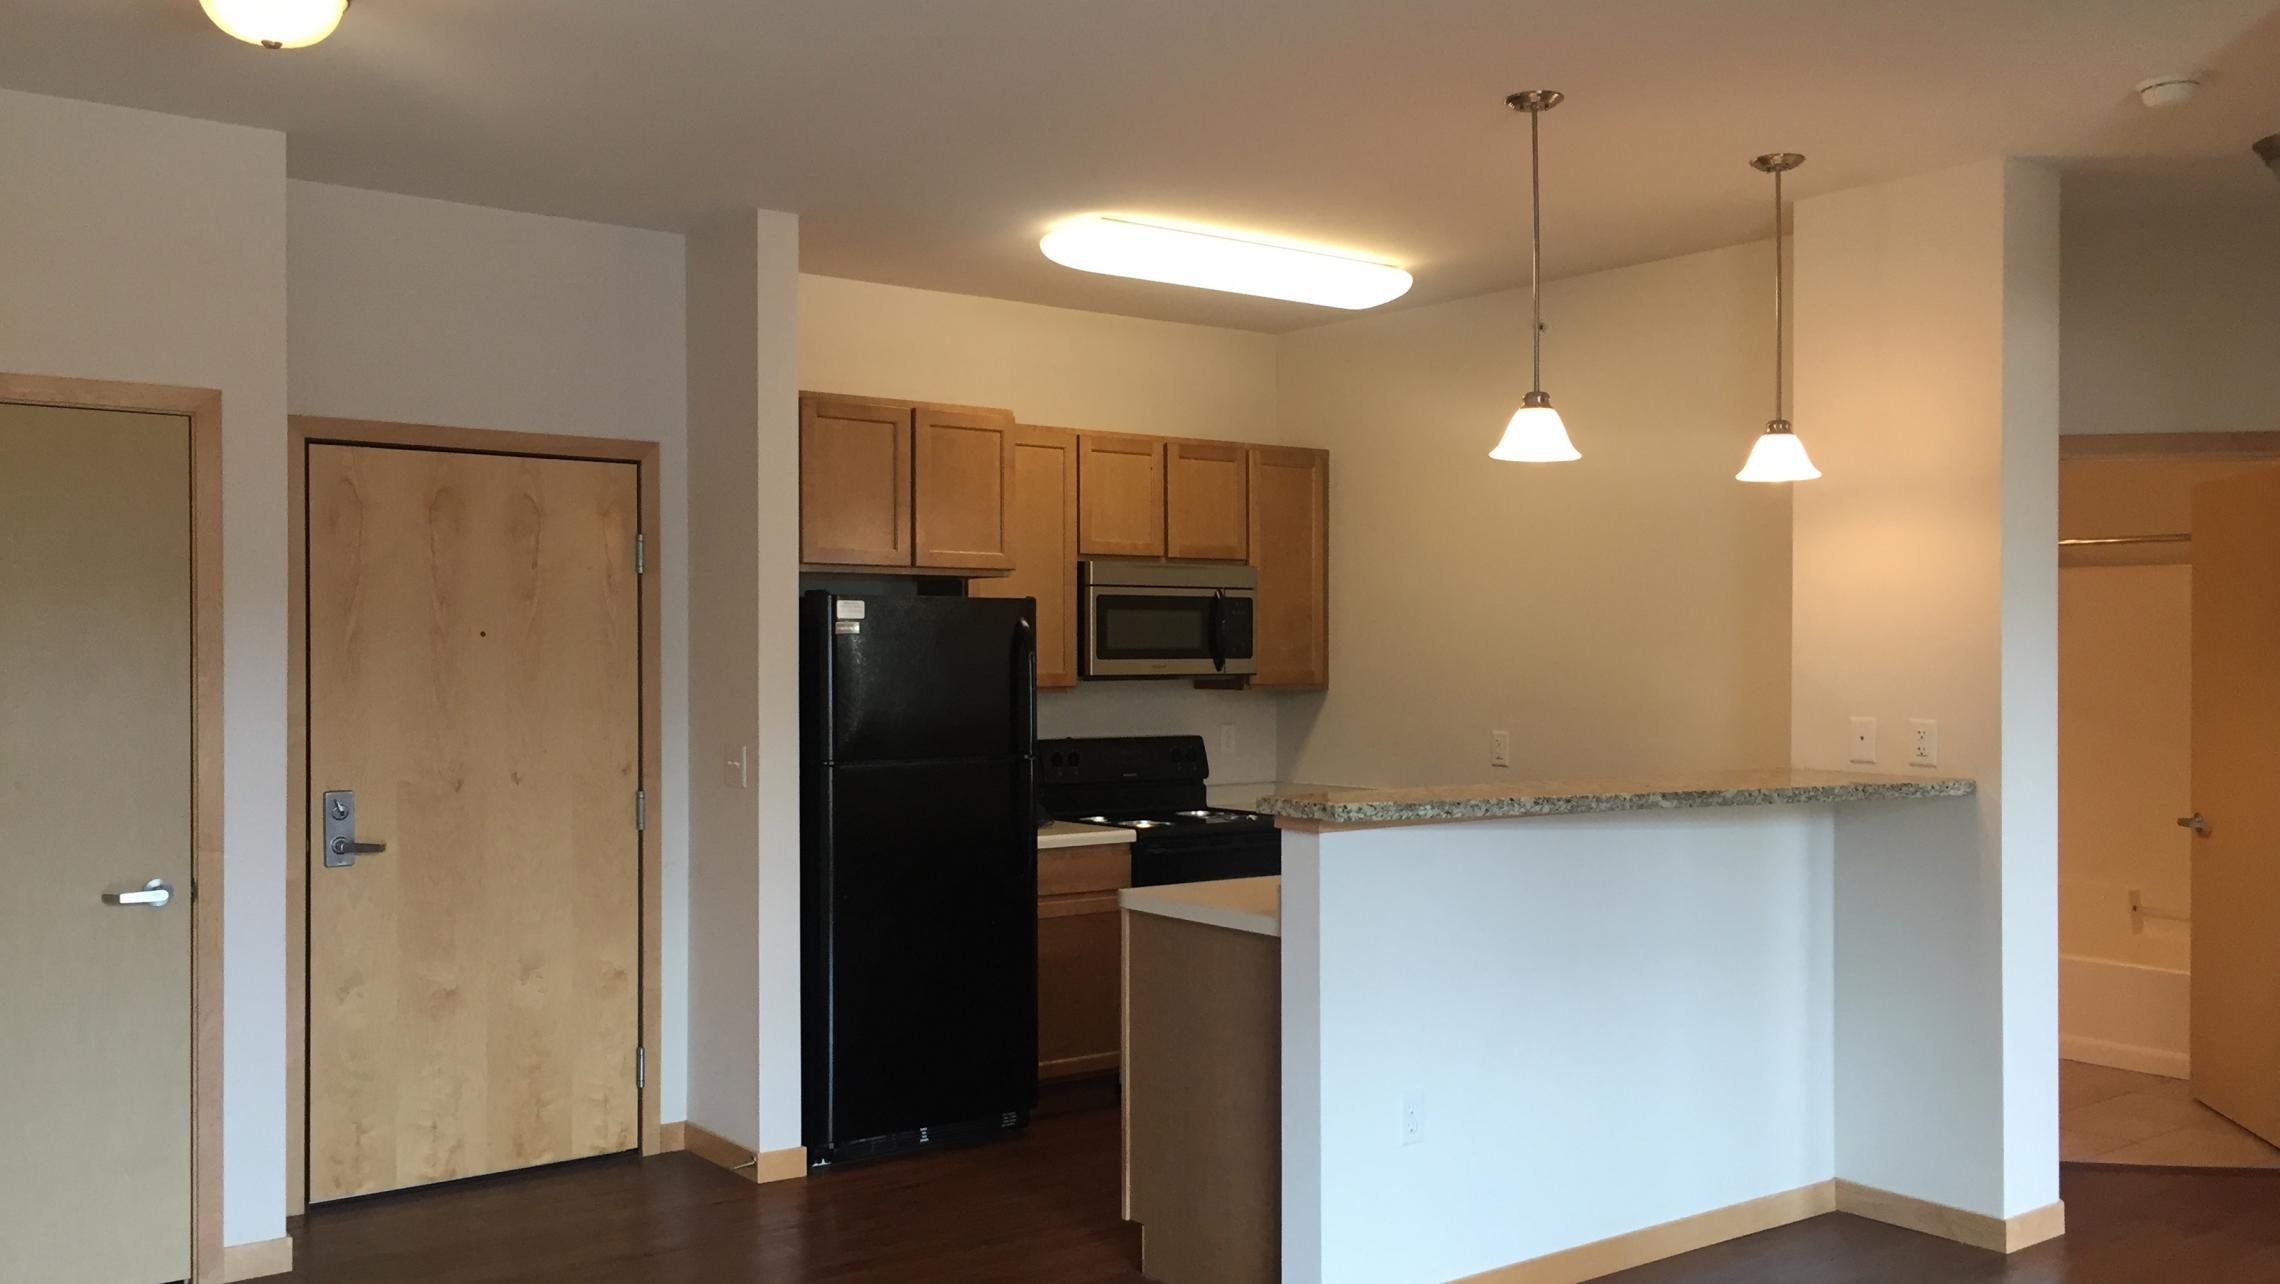 The-Depot-Apartment-2-201-One-Bedroom-Kitchen-Living-Bathroom-Bathtub-Rooftop-Terrace-Fitness-Downtown-Madison-Capitol-Bike-Trails-Cats-Lifestyle-City-Lake-Balcony-Views